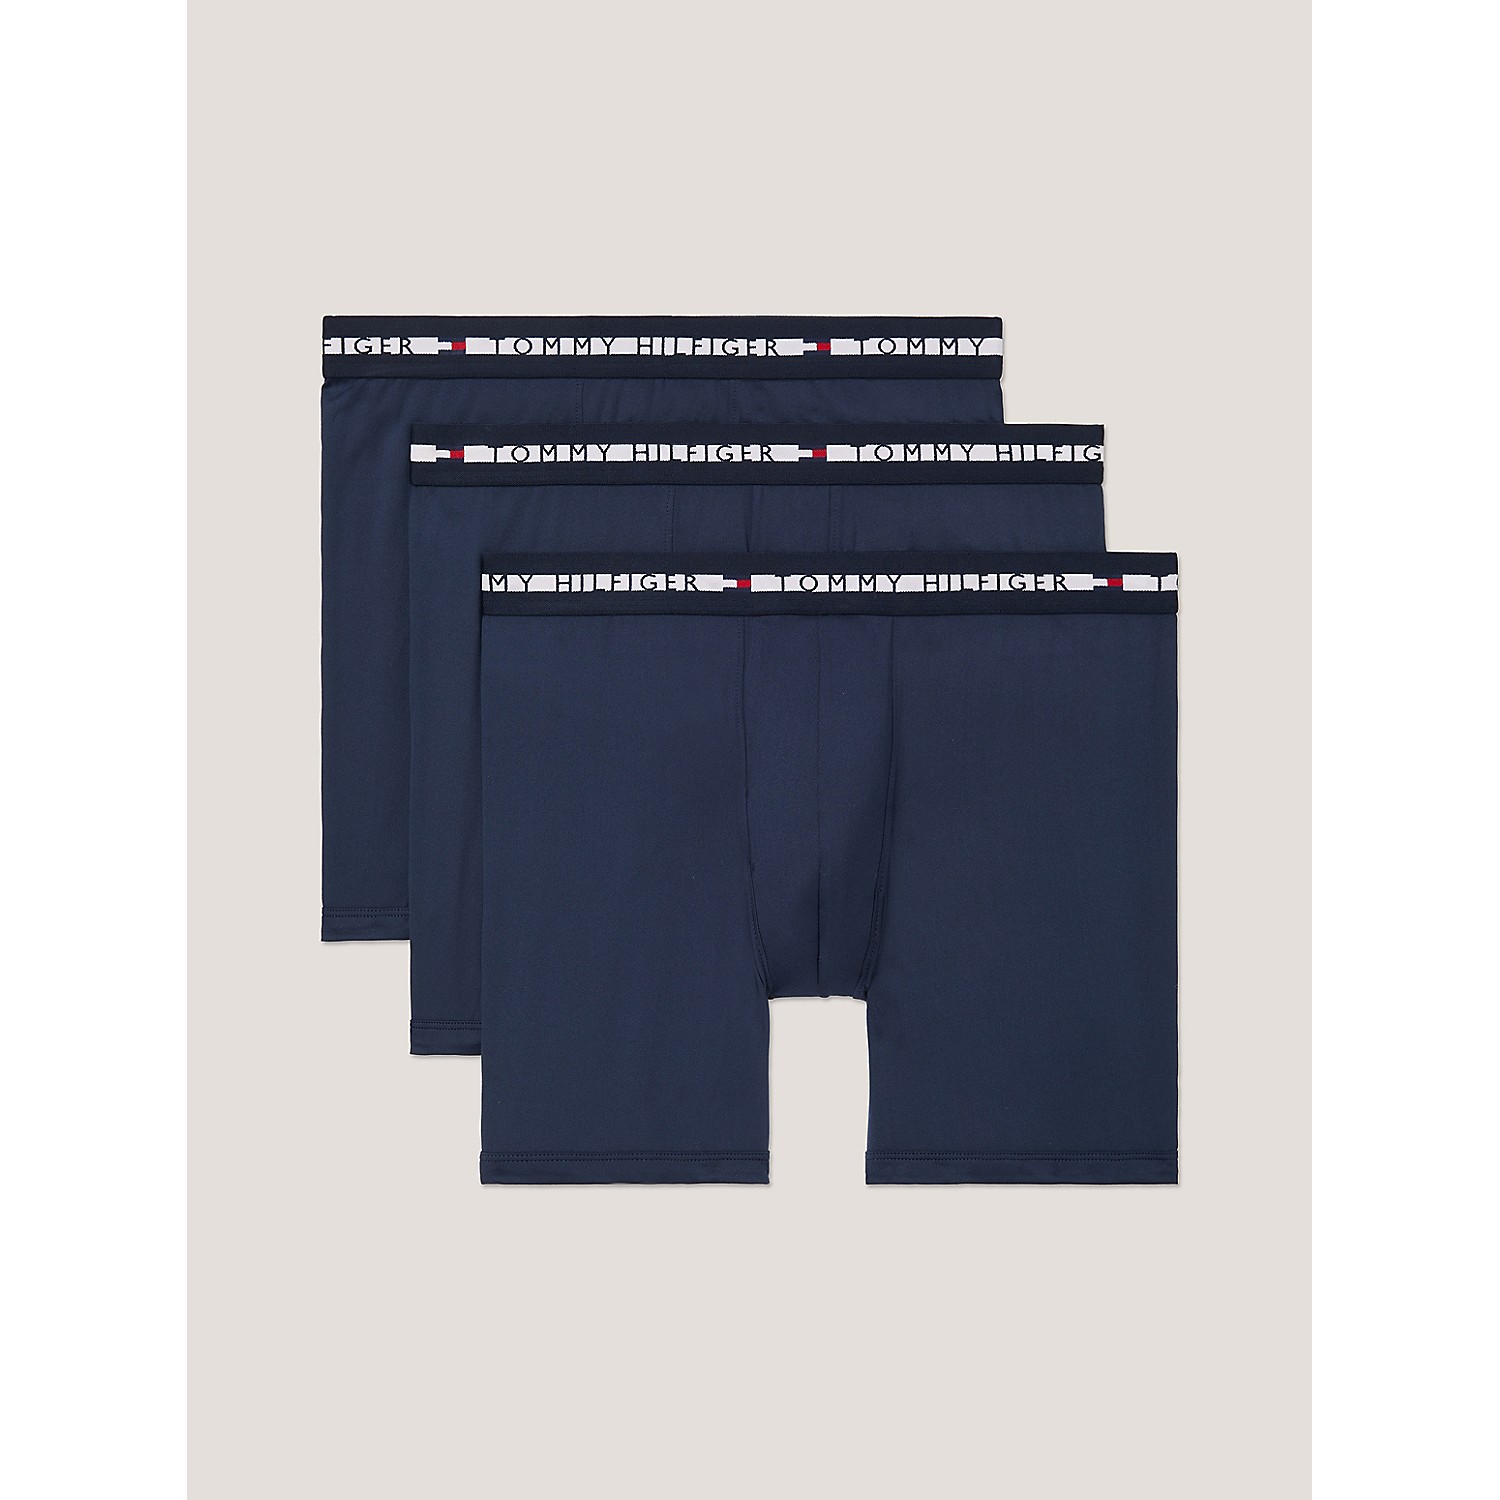 TOMMY HILFIGER TH Comfort+ Boxer Brief 3-Pack